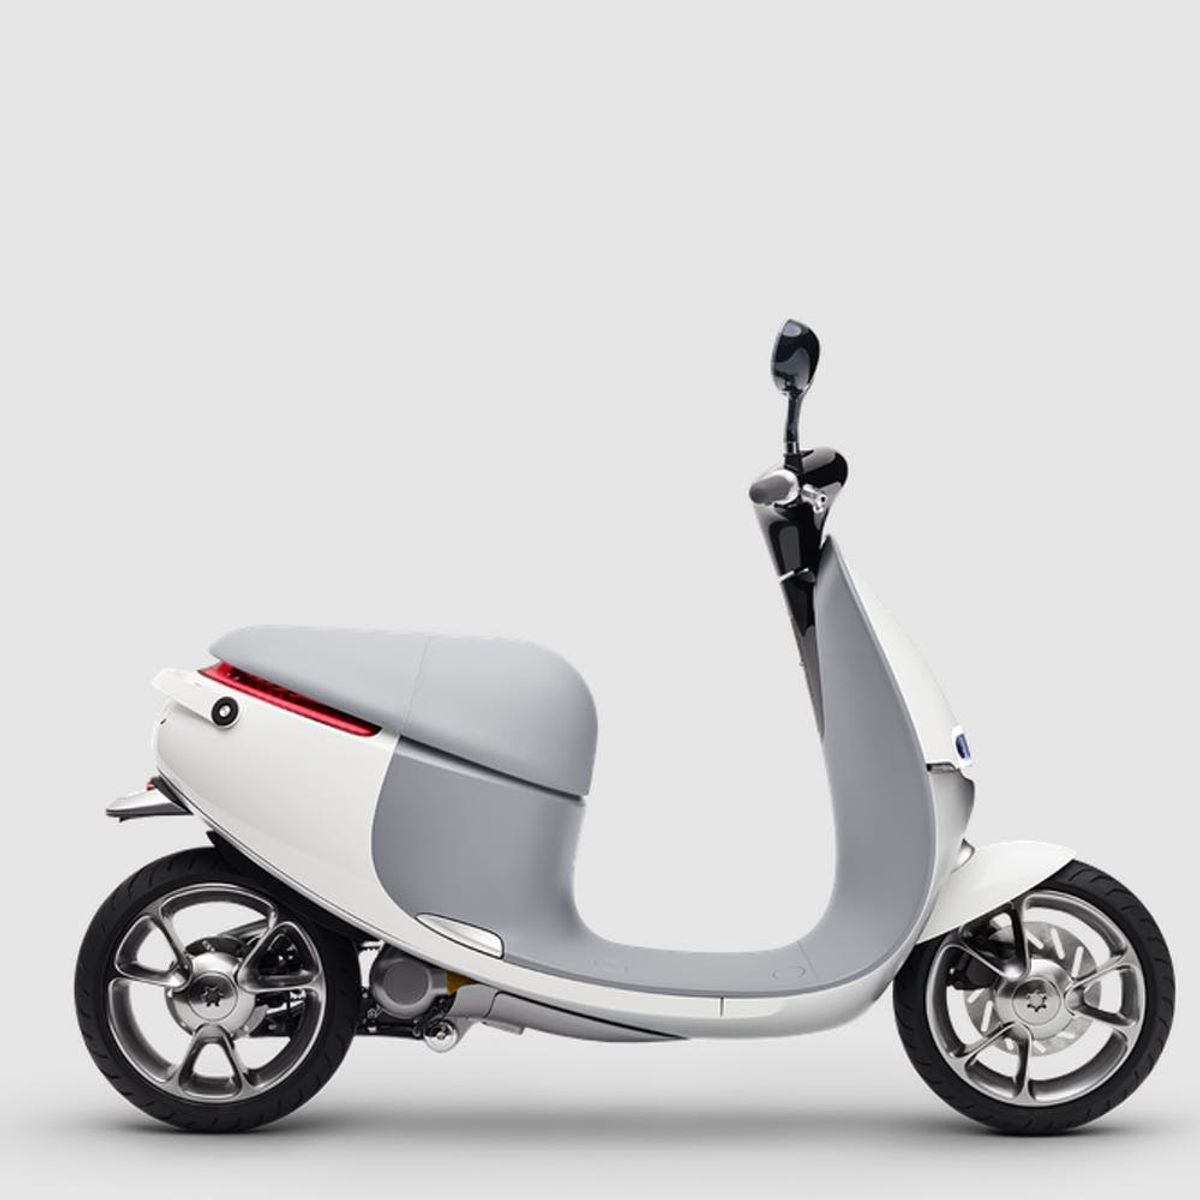 The Smart Scooter of the Future Is Here